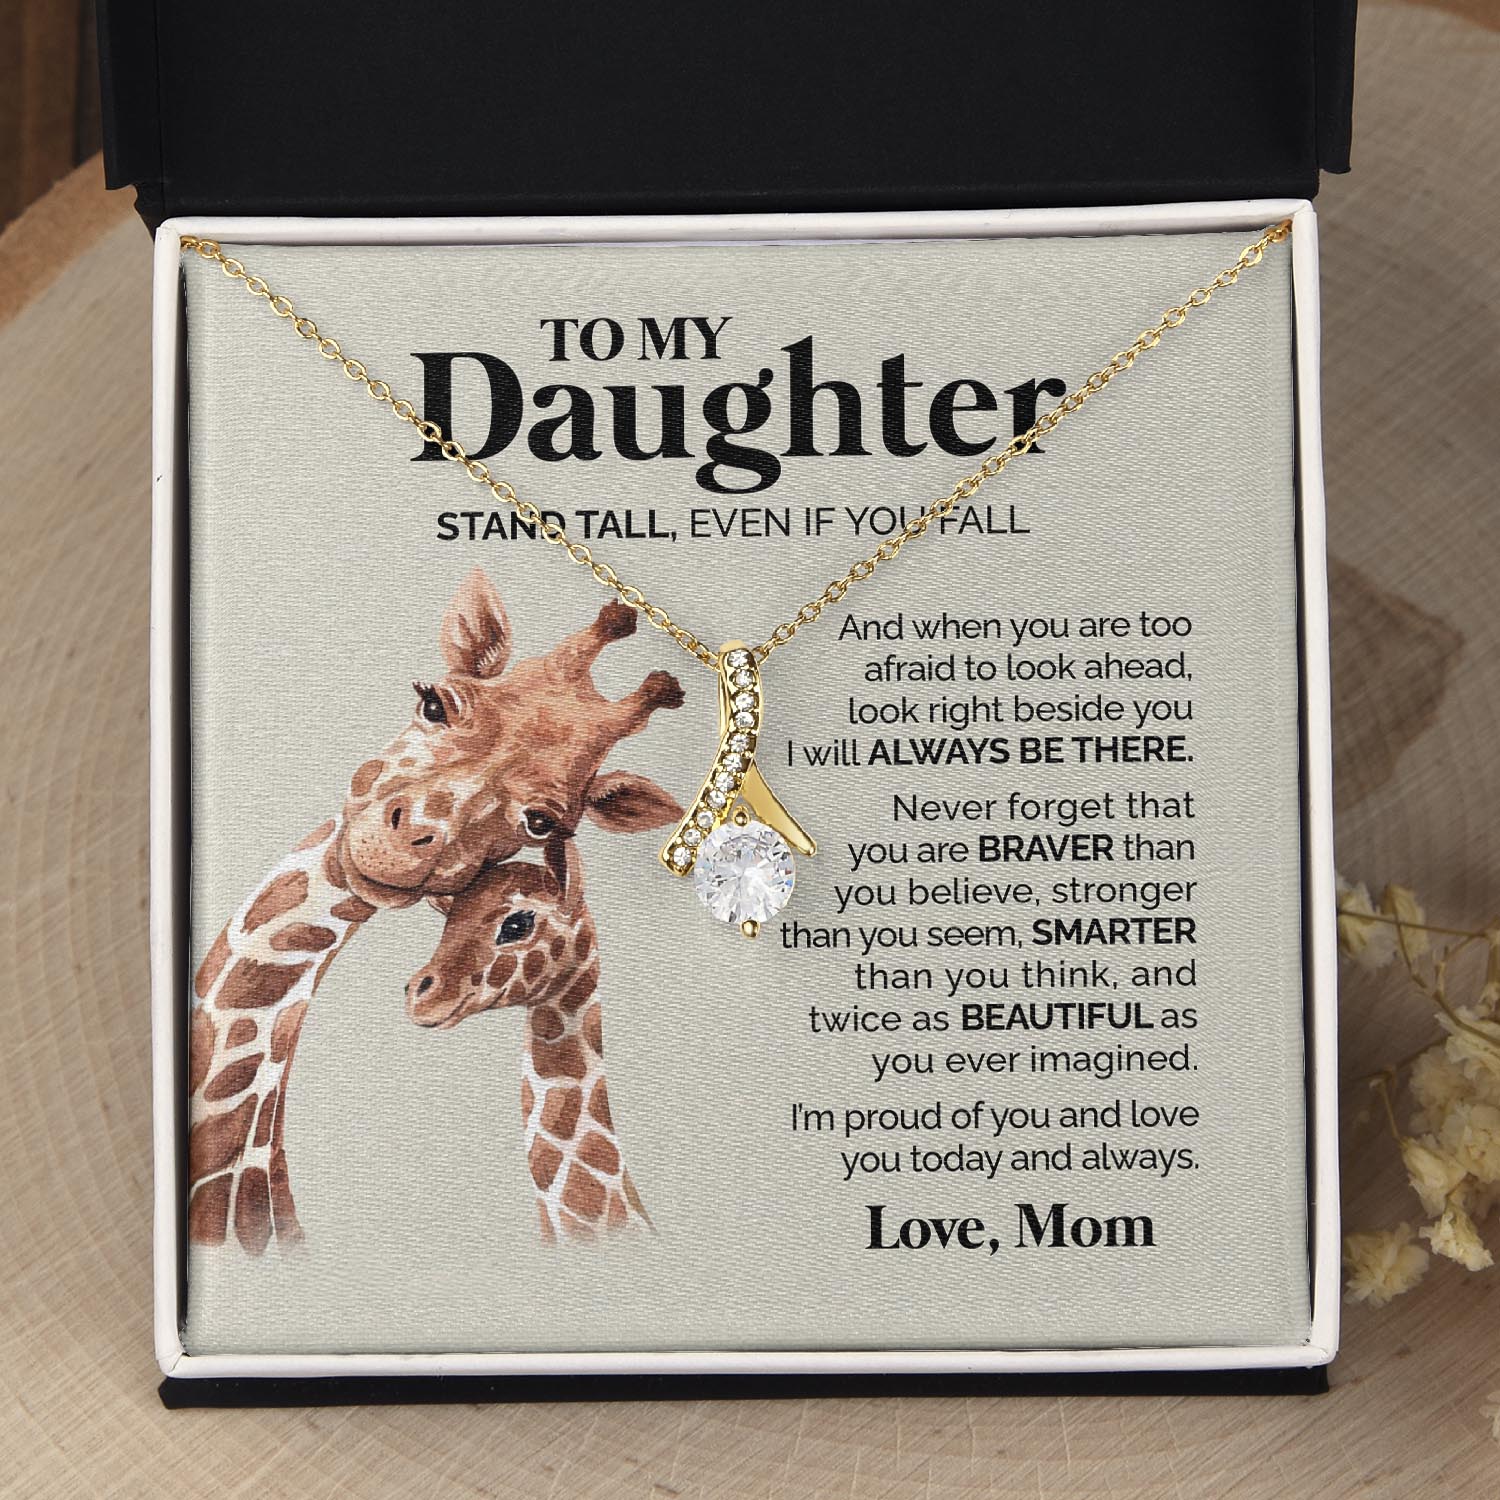 ShineOn Fulfillment Jewelry 18K Yellow Gold Finish / Two-Toned Box To my Daughter from Mom - Stand tall - Ribbon Necklace